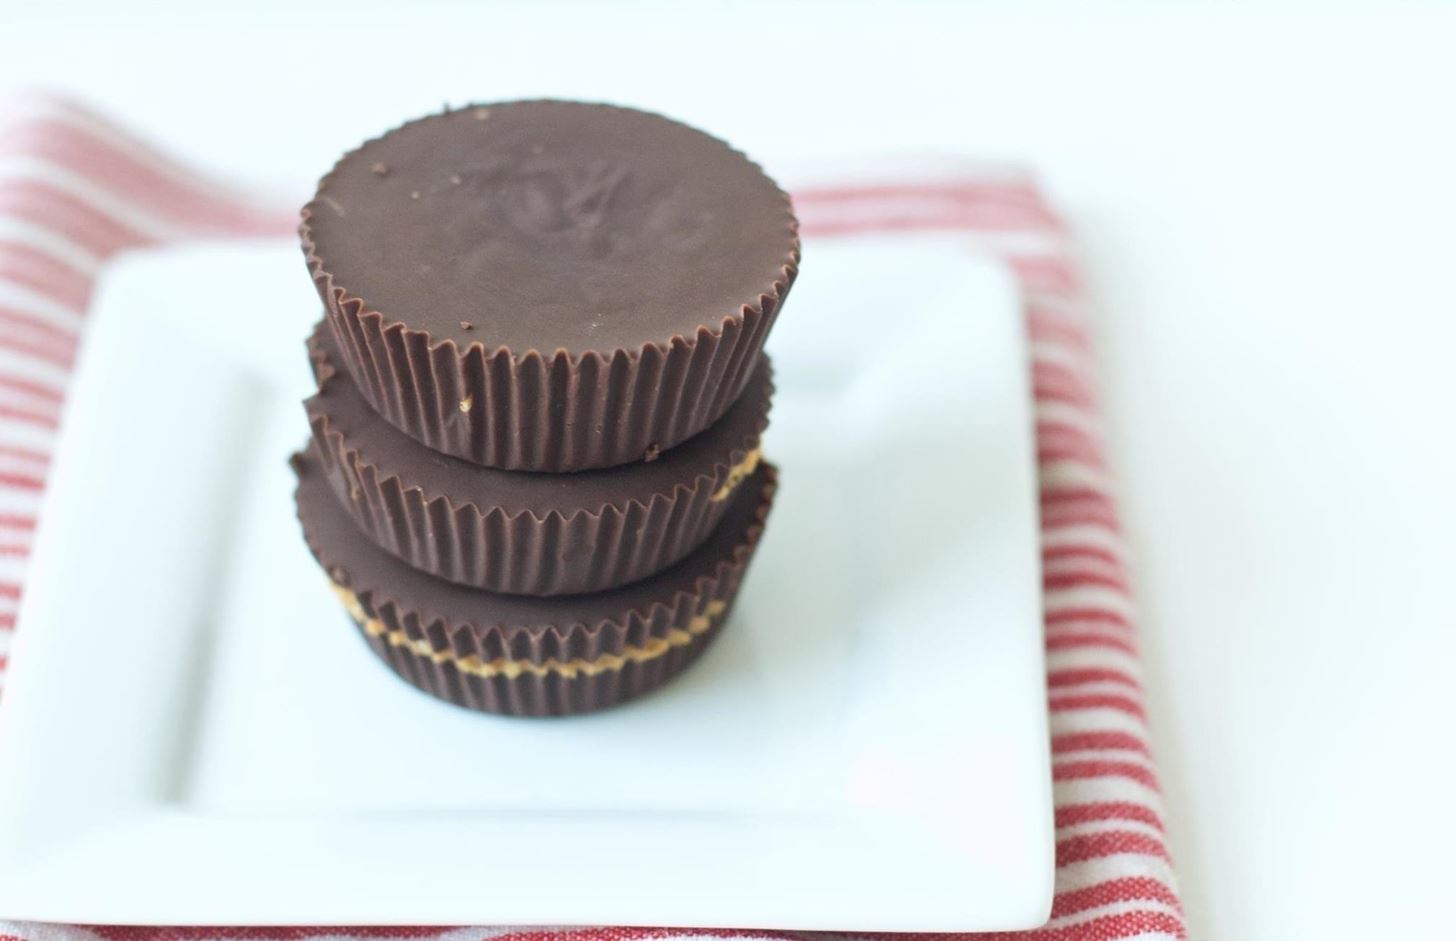 Making Reese's Peanut Butter Cups at Home Is Super Simple